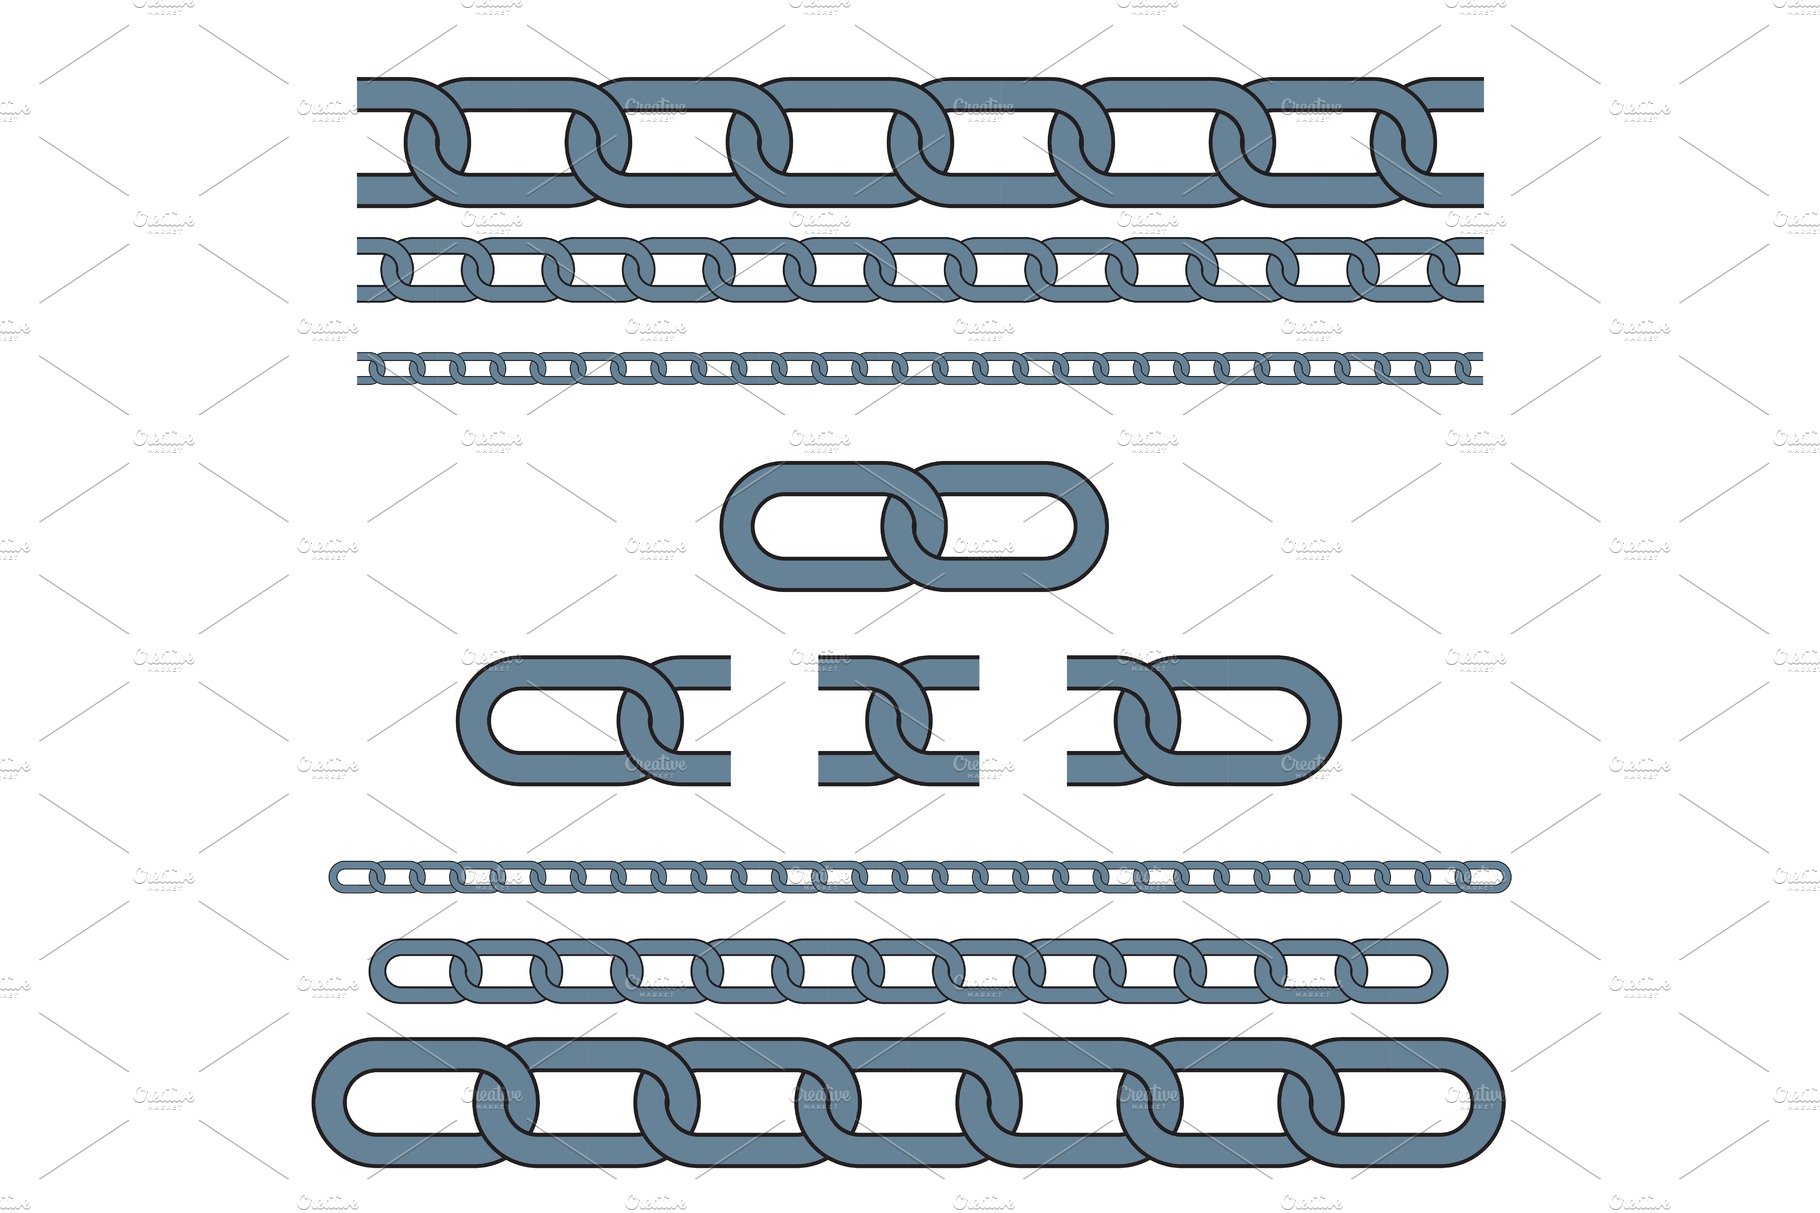 set of vector chains cover image.